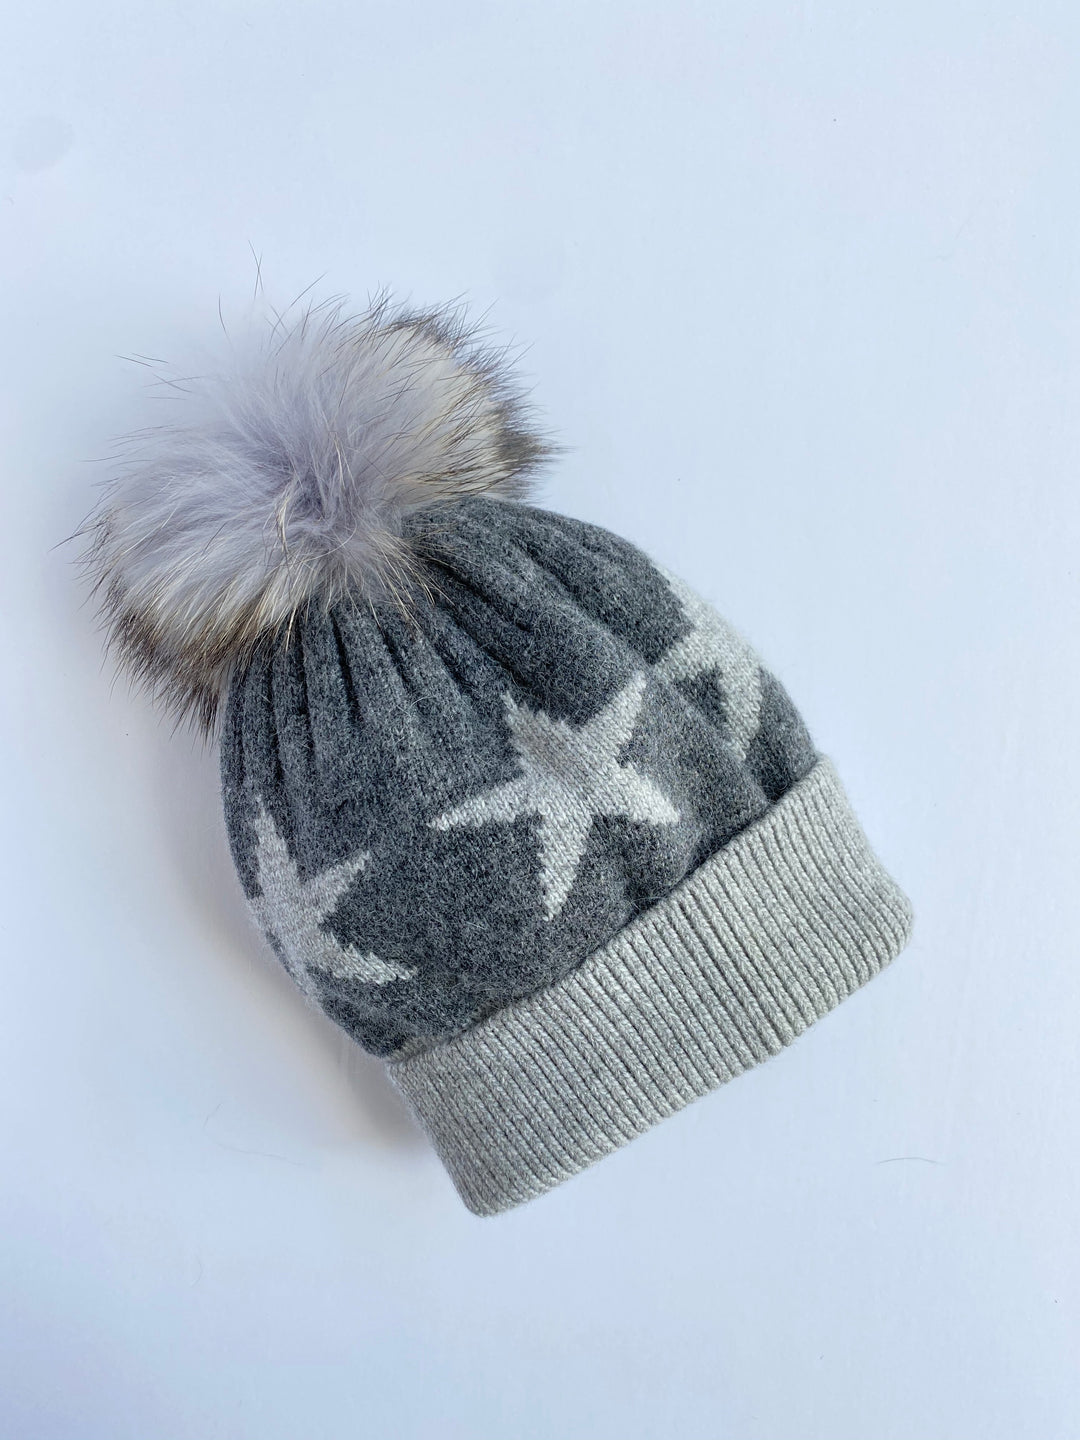 Equation Starry Hat in Dark gray with heather gray stars